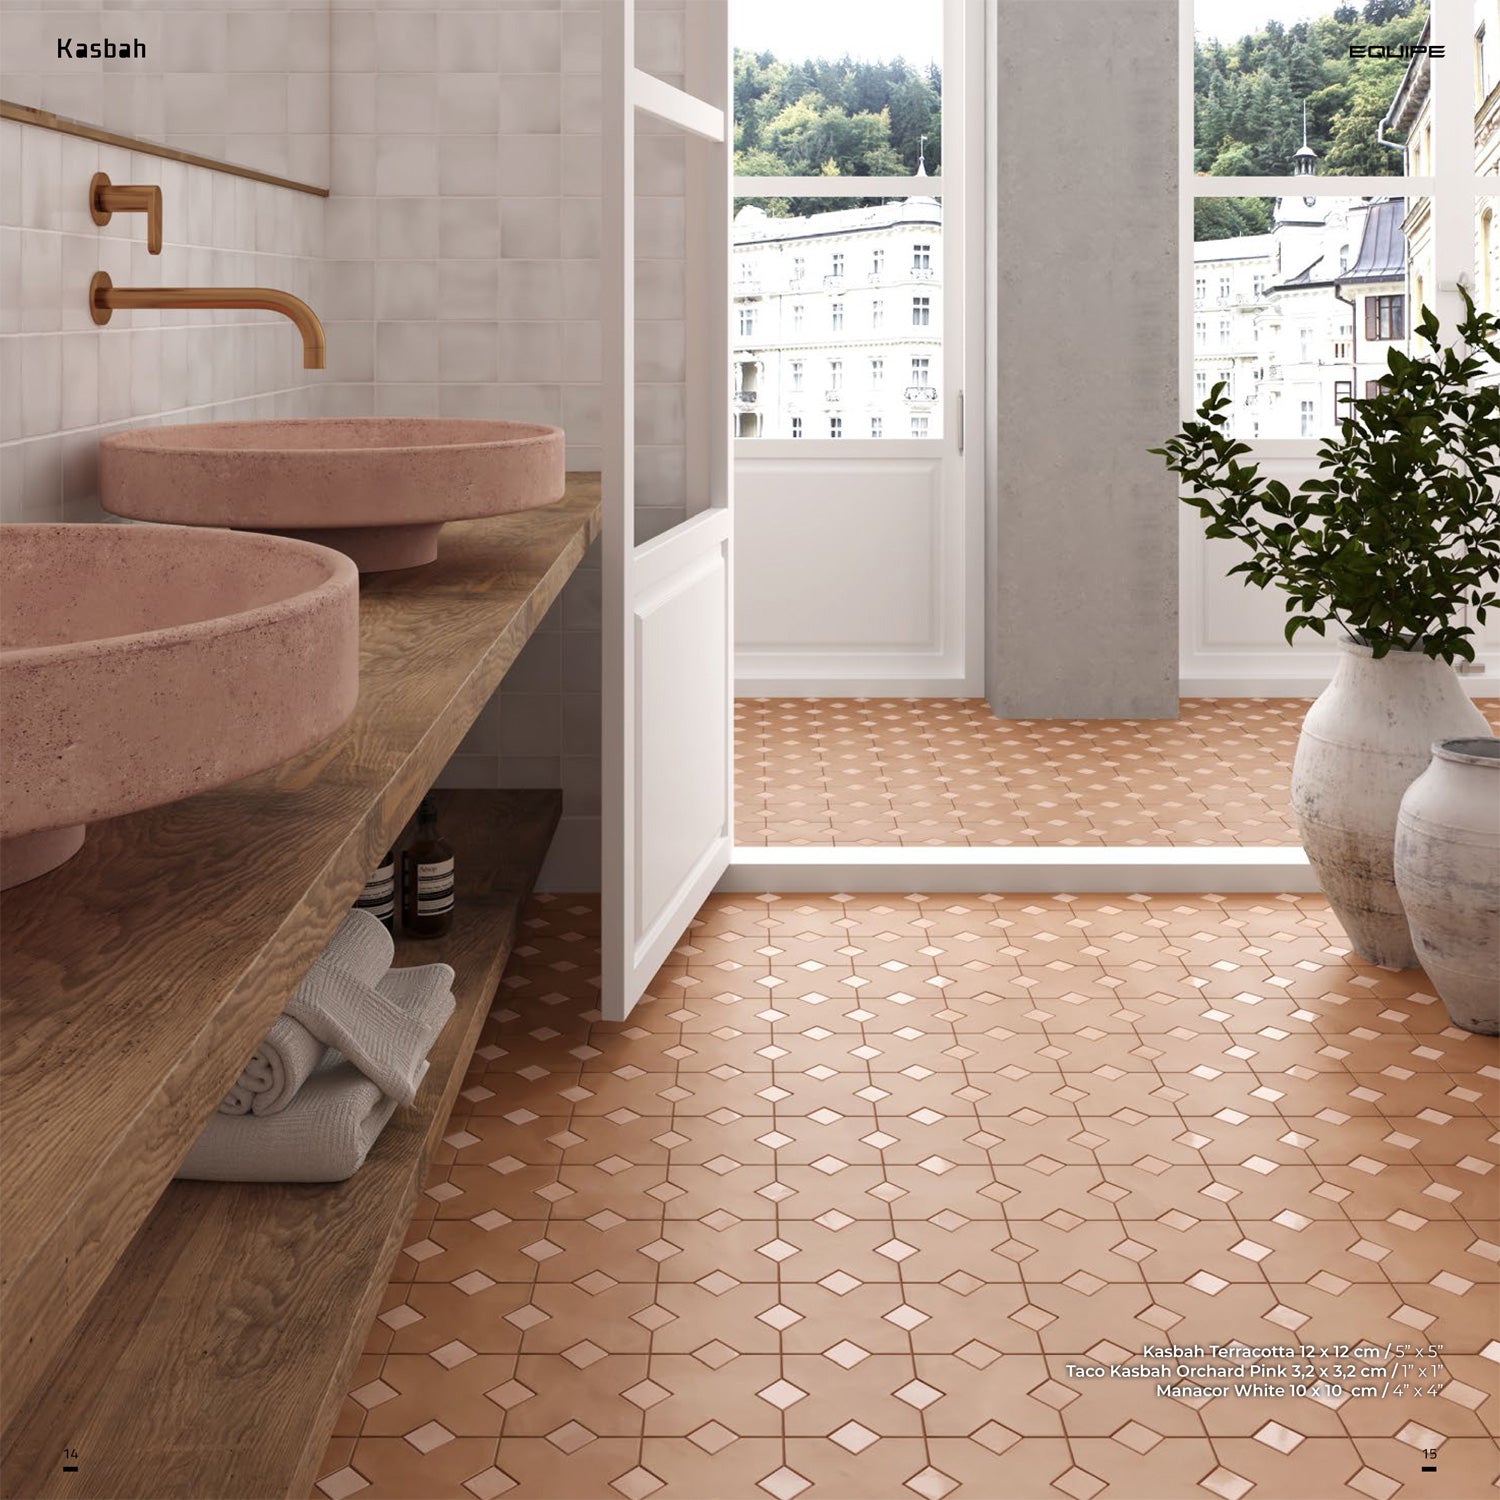 Equipe - Kasbah Collection - 1 in. x 1 in. Porcelain Tile - Orchard Pink Matte